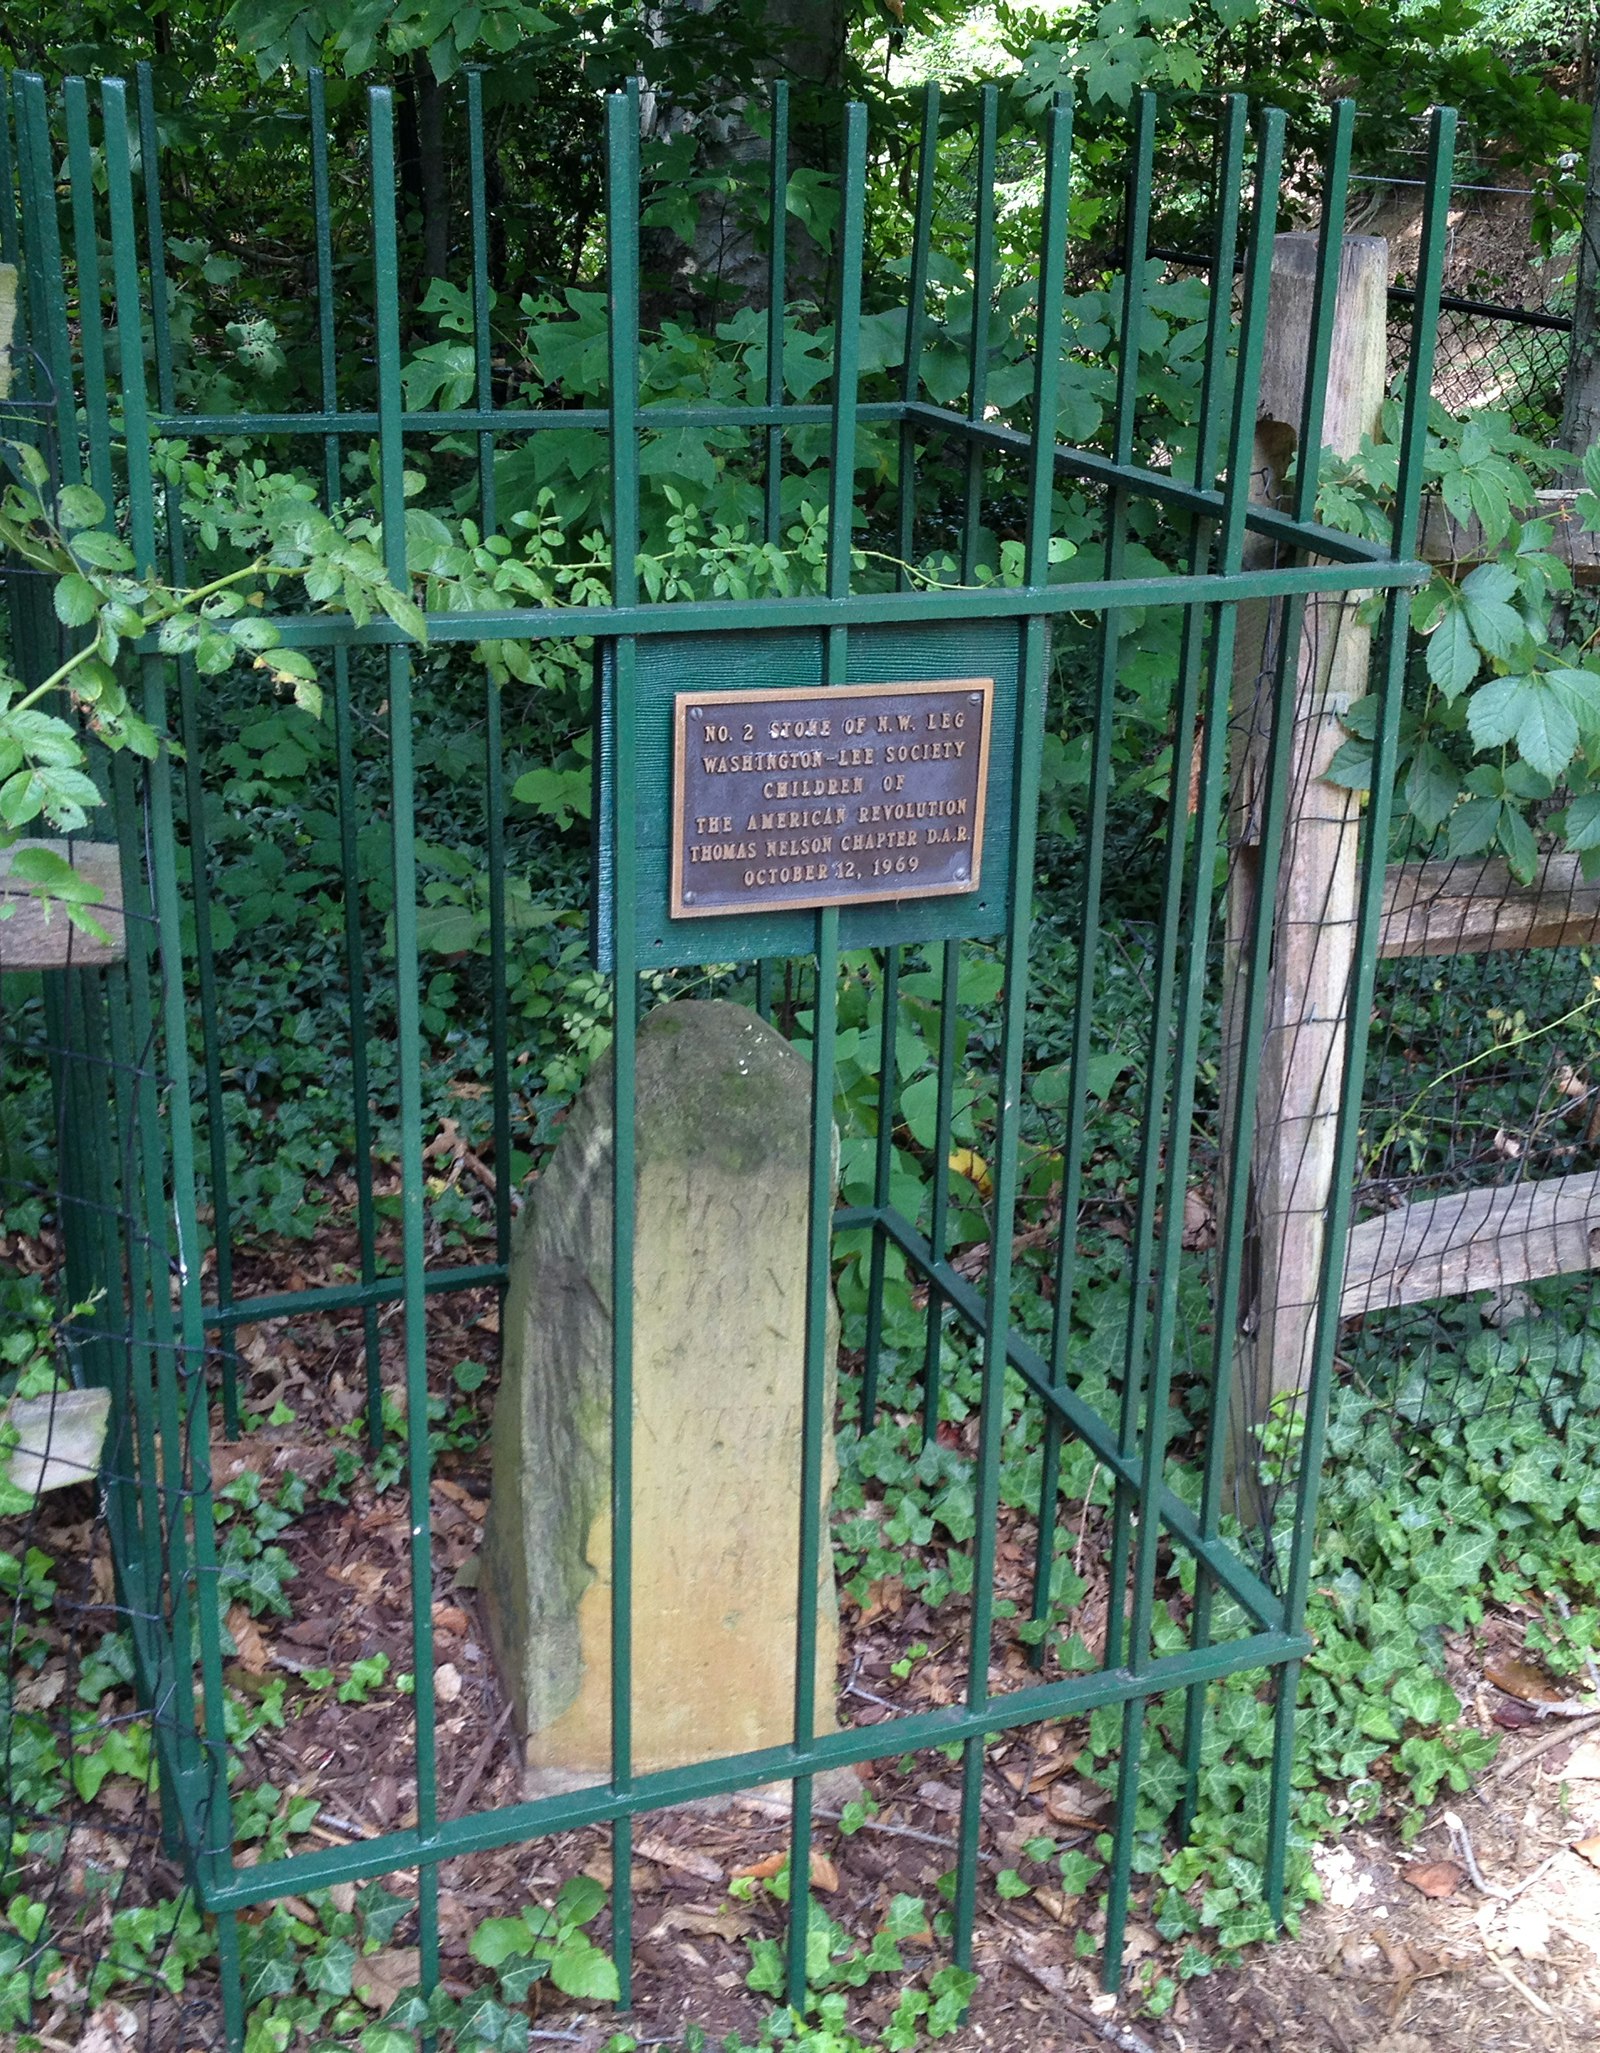 A three-foot stone with a rounded top sits behind a green fence marked by a plaque that explains the stone is one of 40 that originally established the city's boundaries. Green vines form the backdrop. © Barbara Noe Kennedy / Lonely Planet